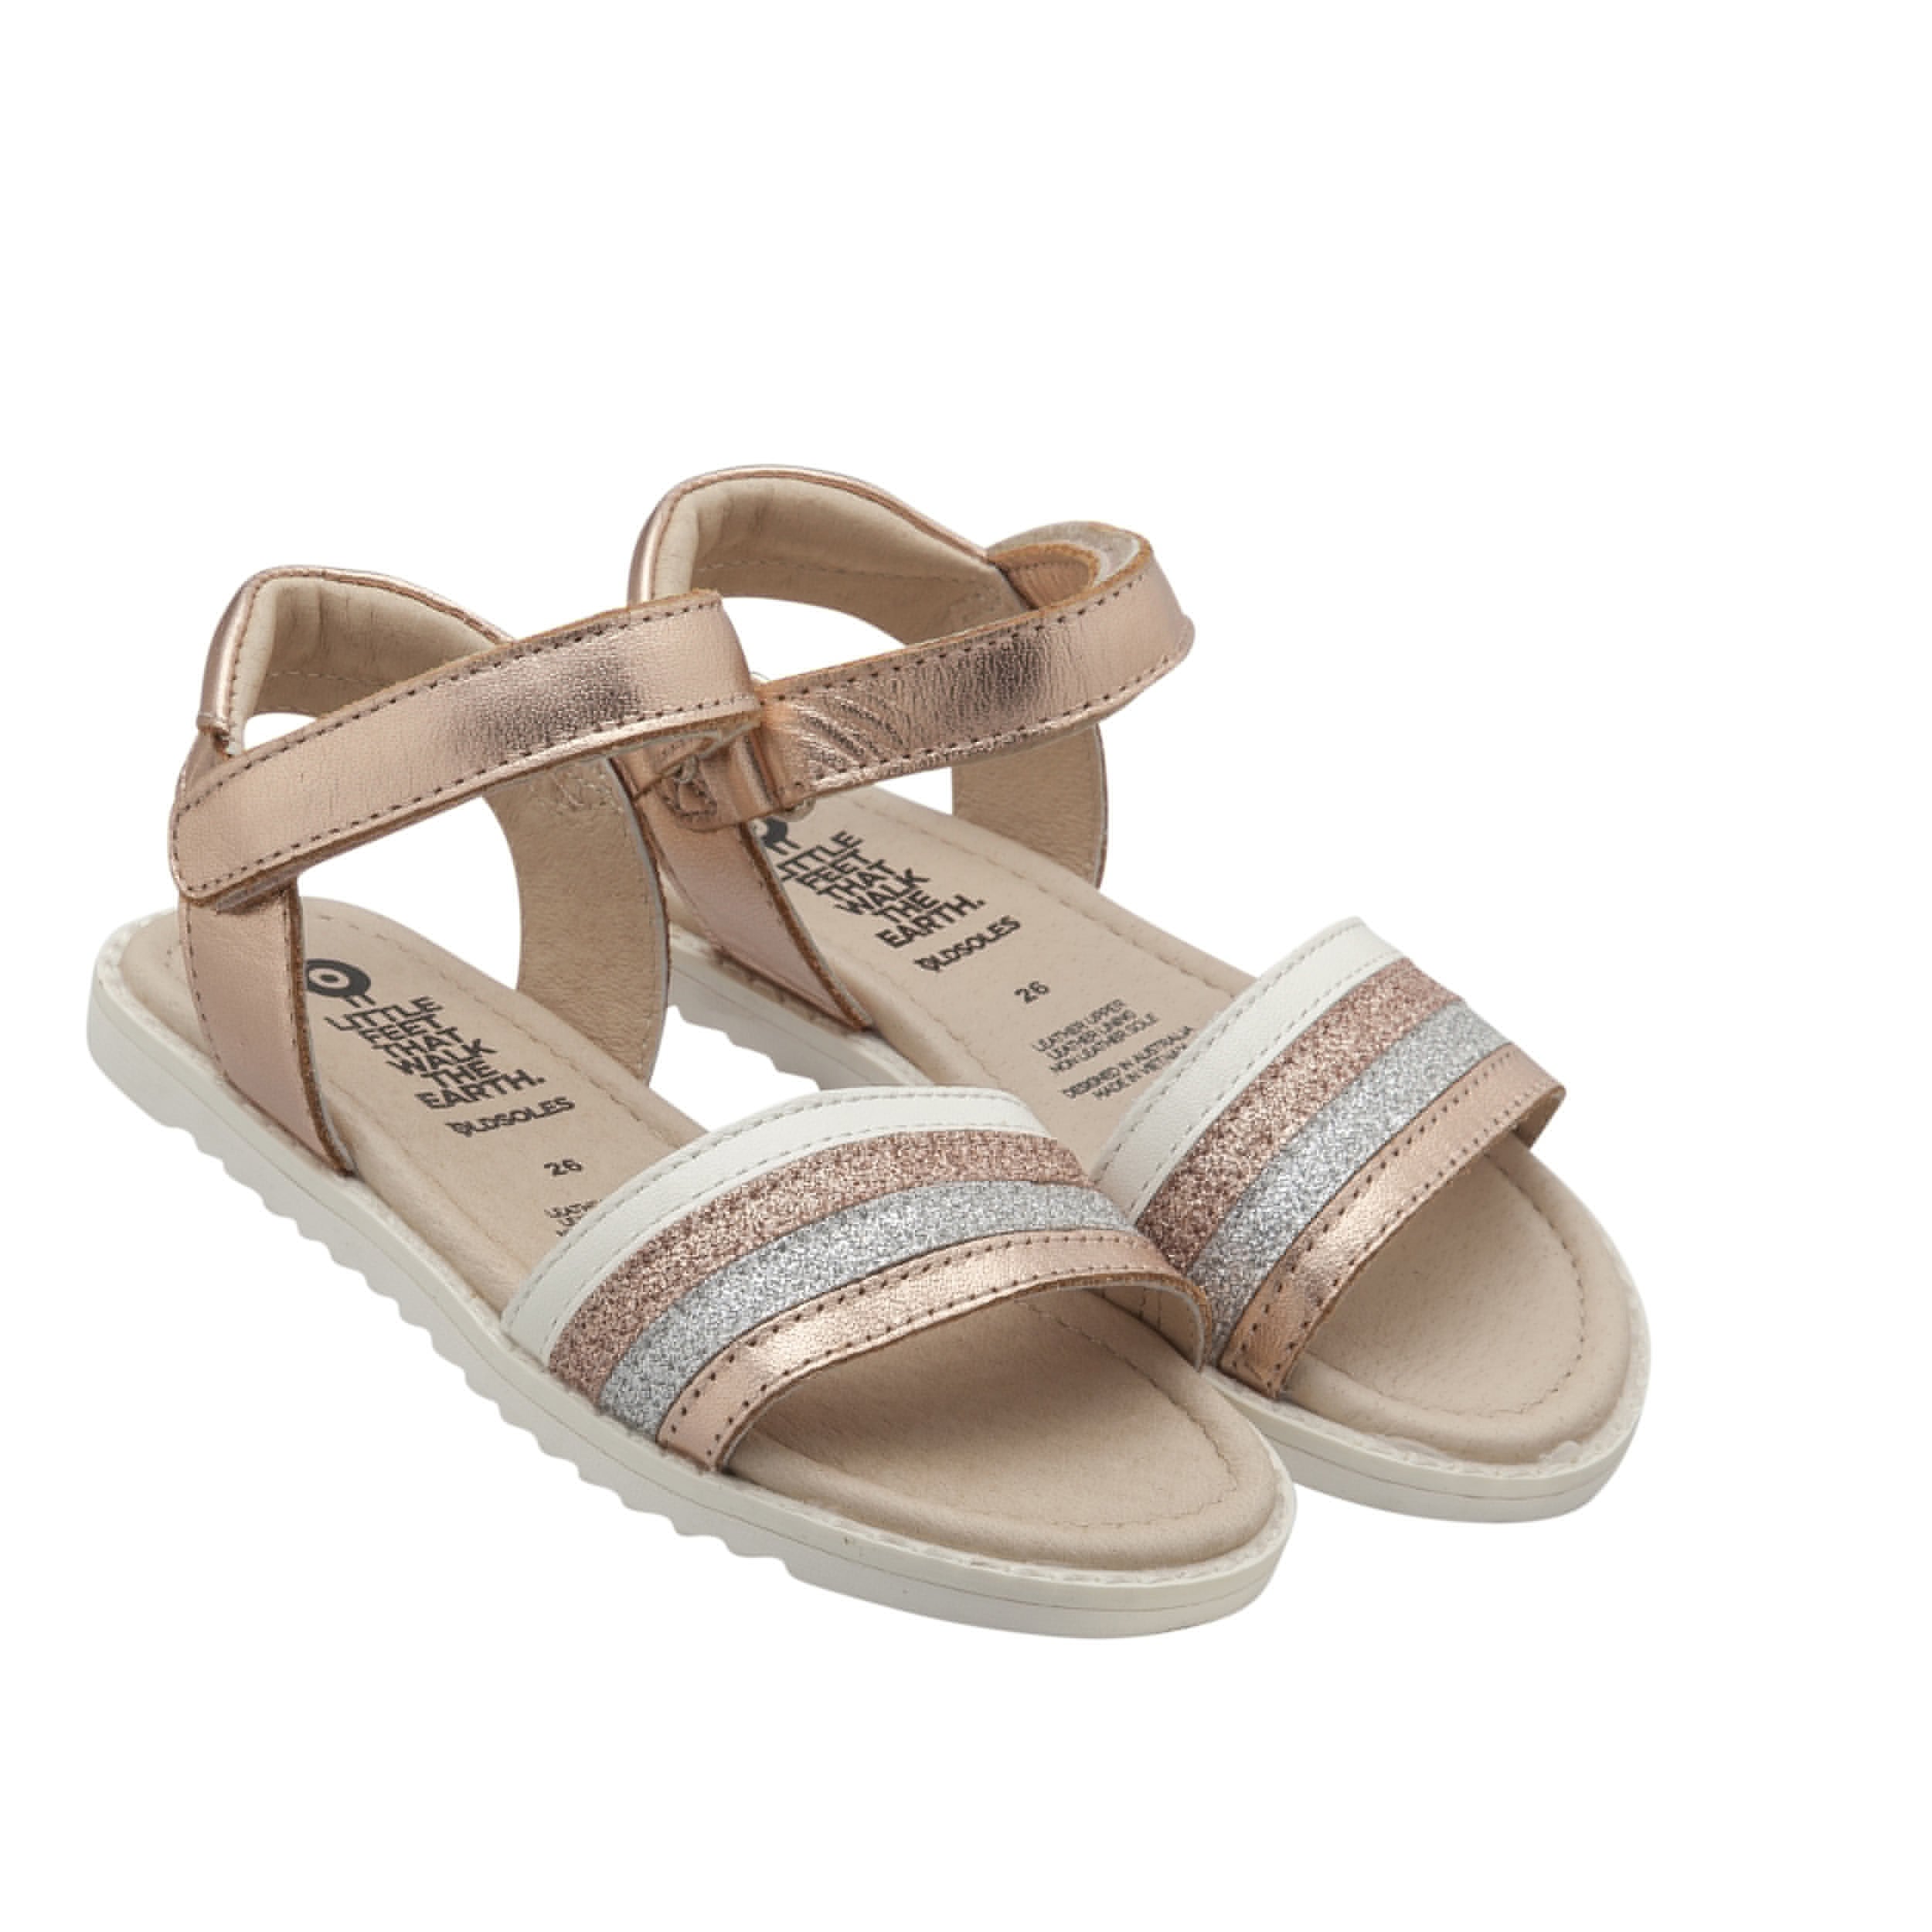 Colour Pop Sandal. Rose gold sandal for girls. Old Soles leather shoes. Shop online or in store at Sticky Fingers Childrens Boutique. 